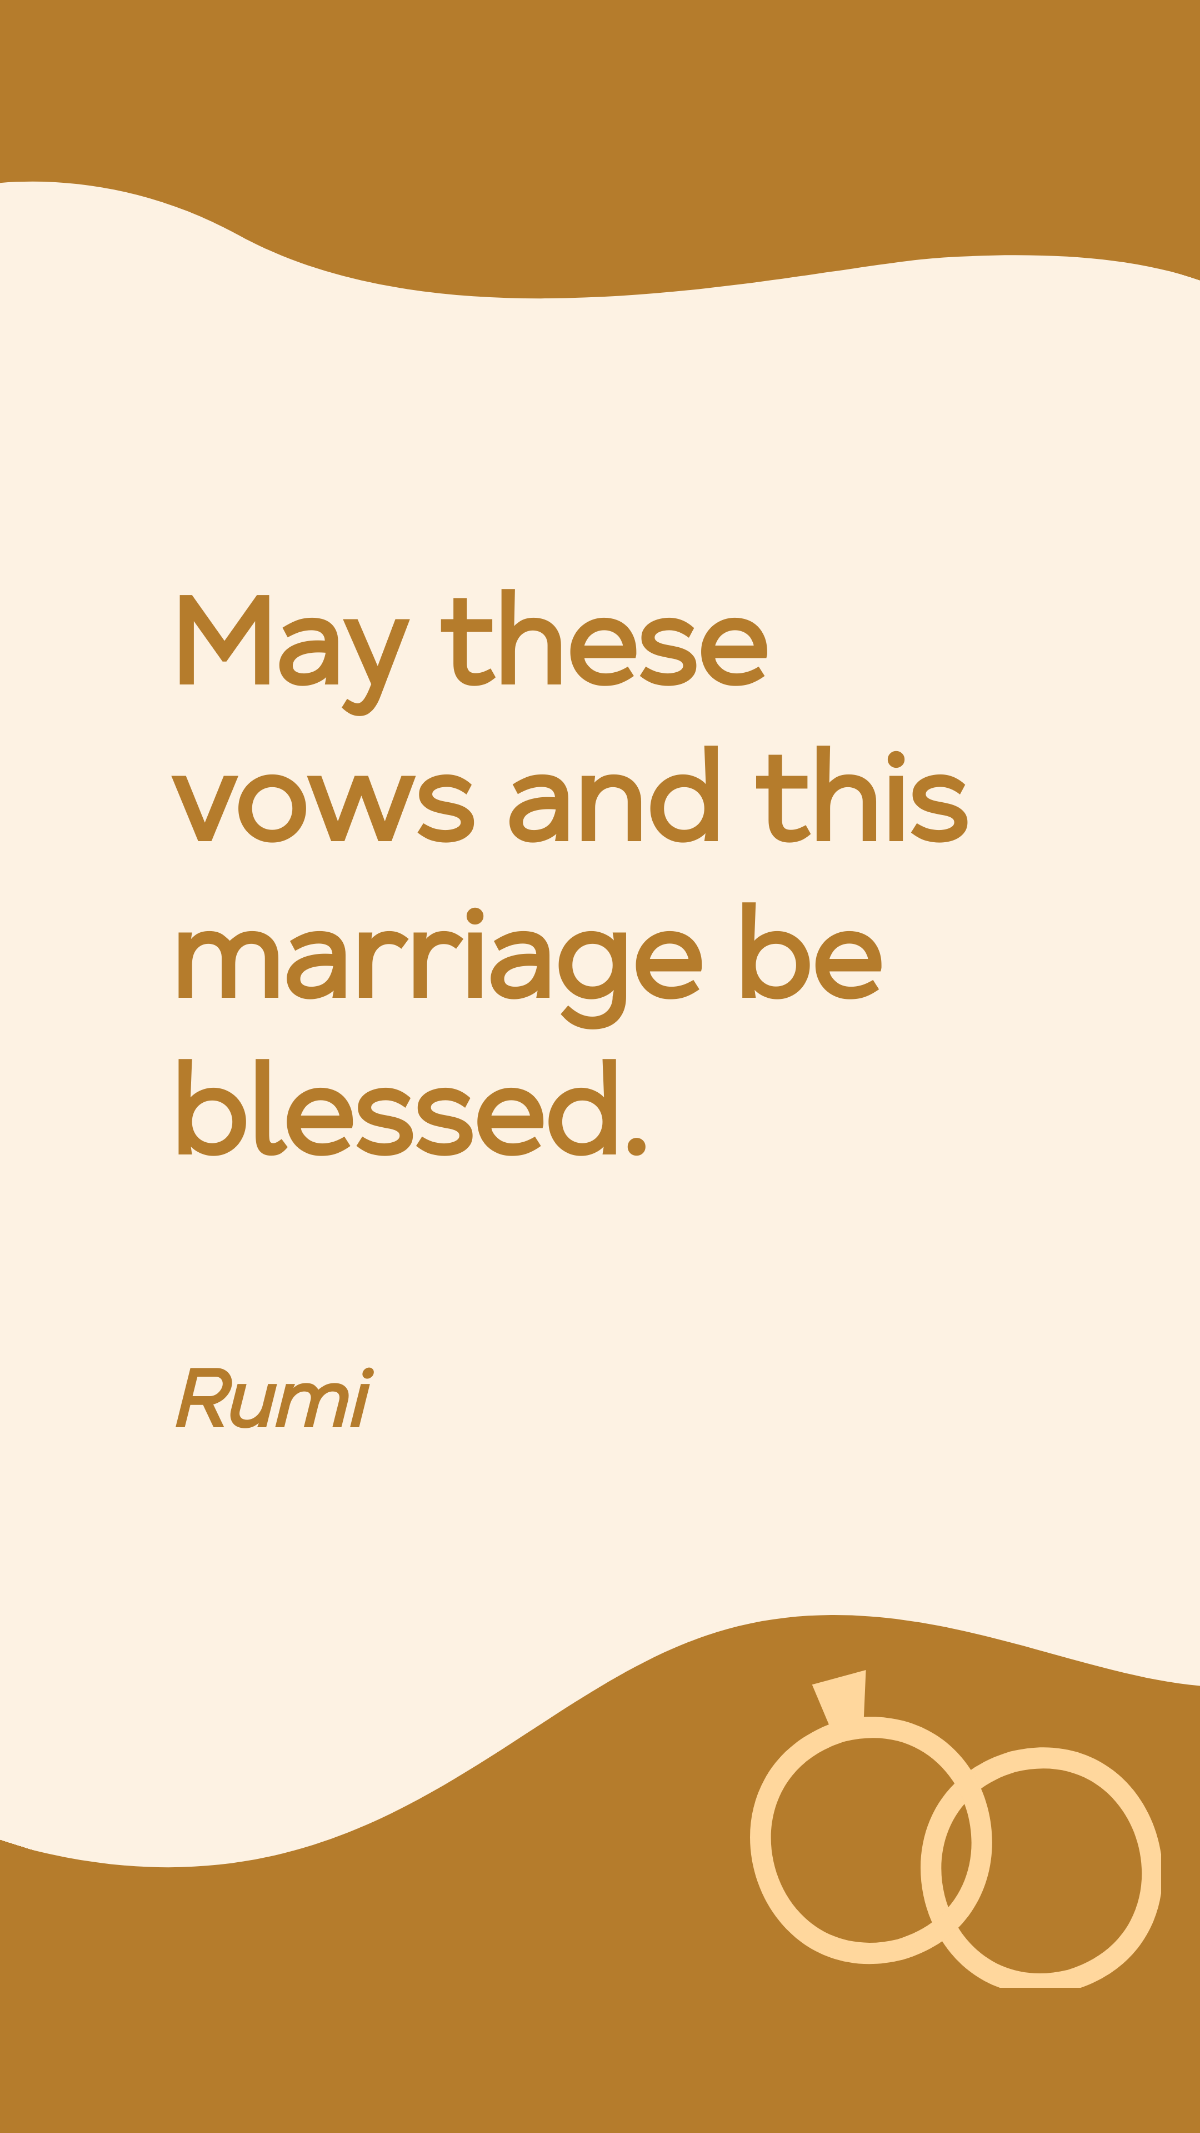 Rumi - May these vows and this marriage be blessed. Template